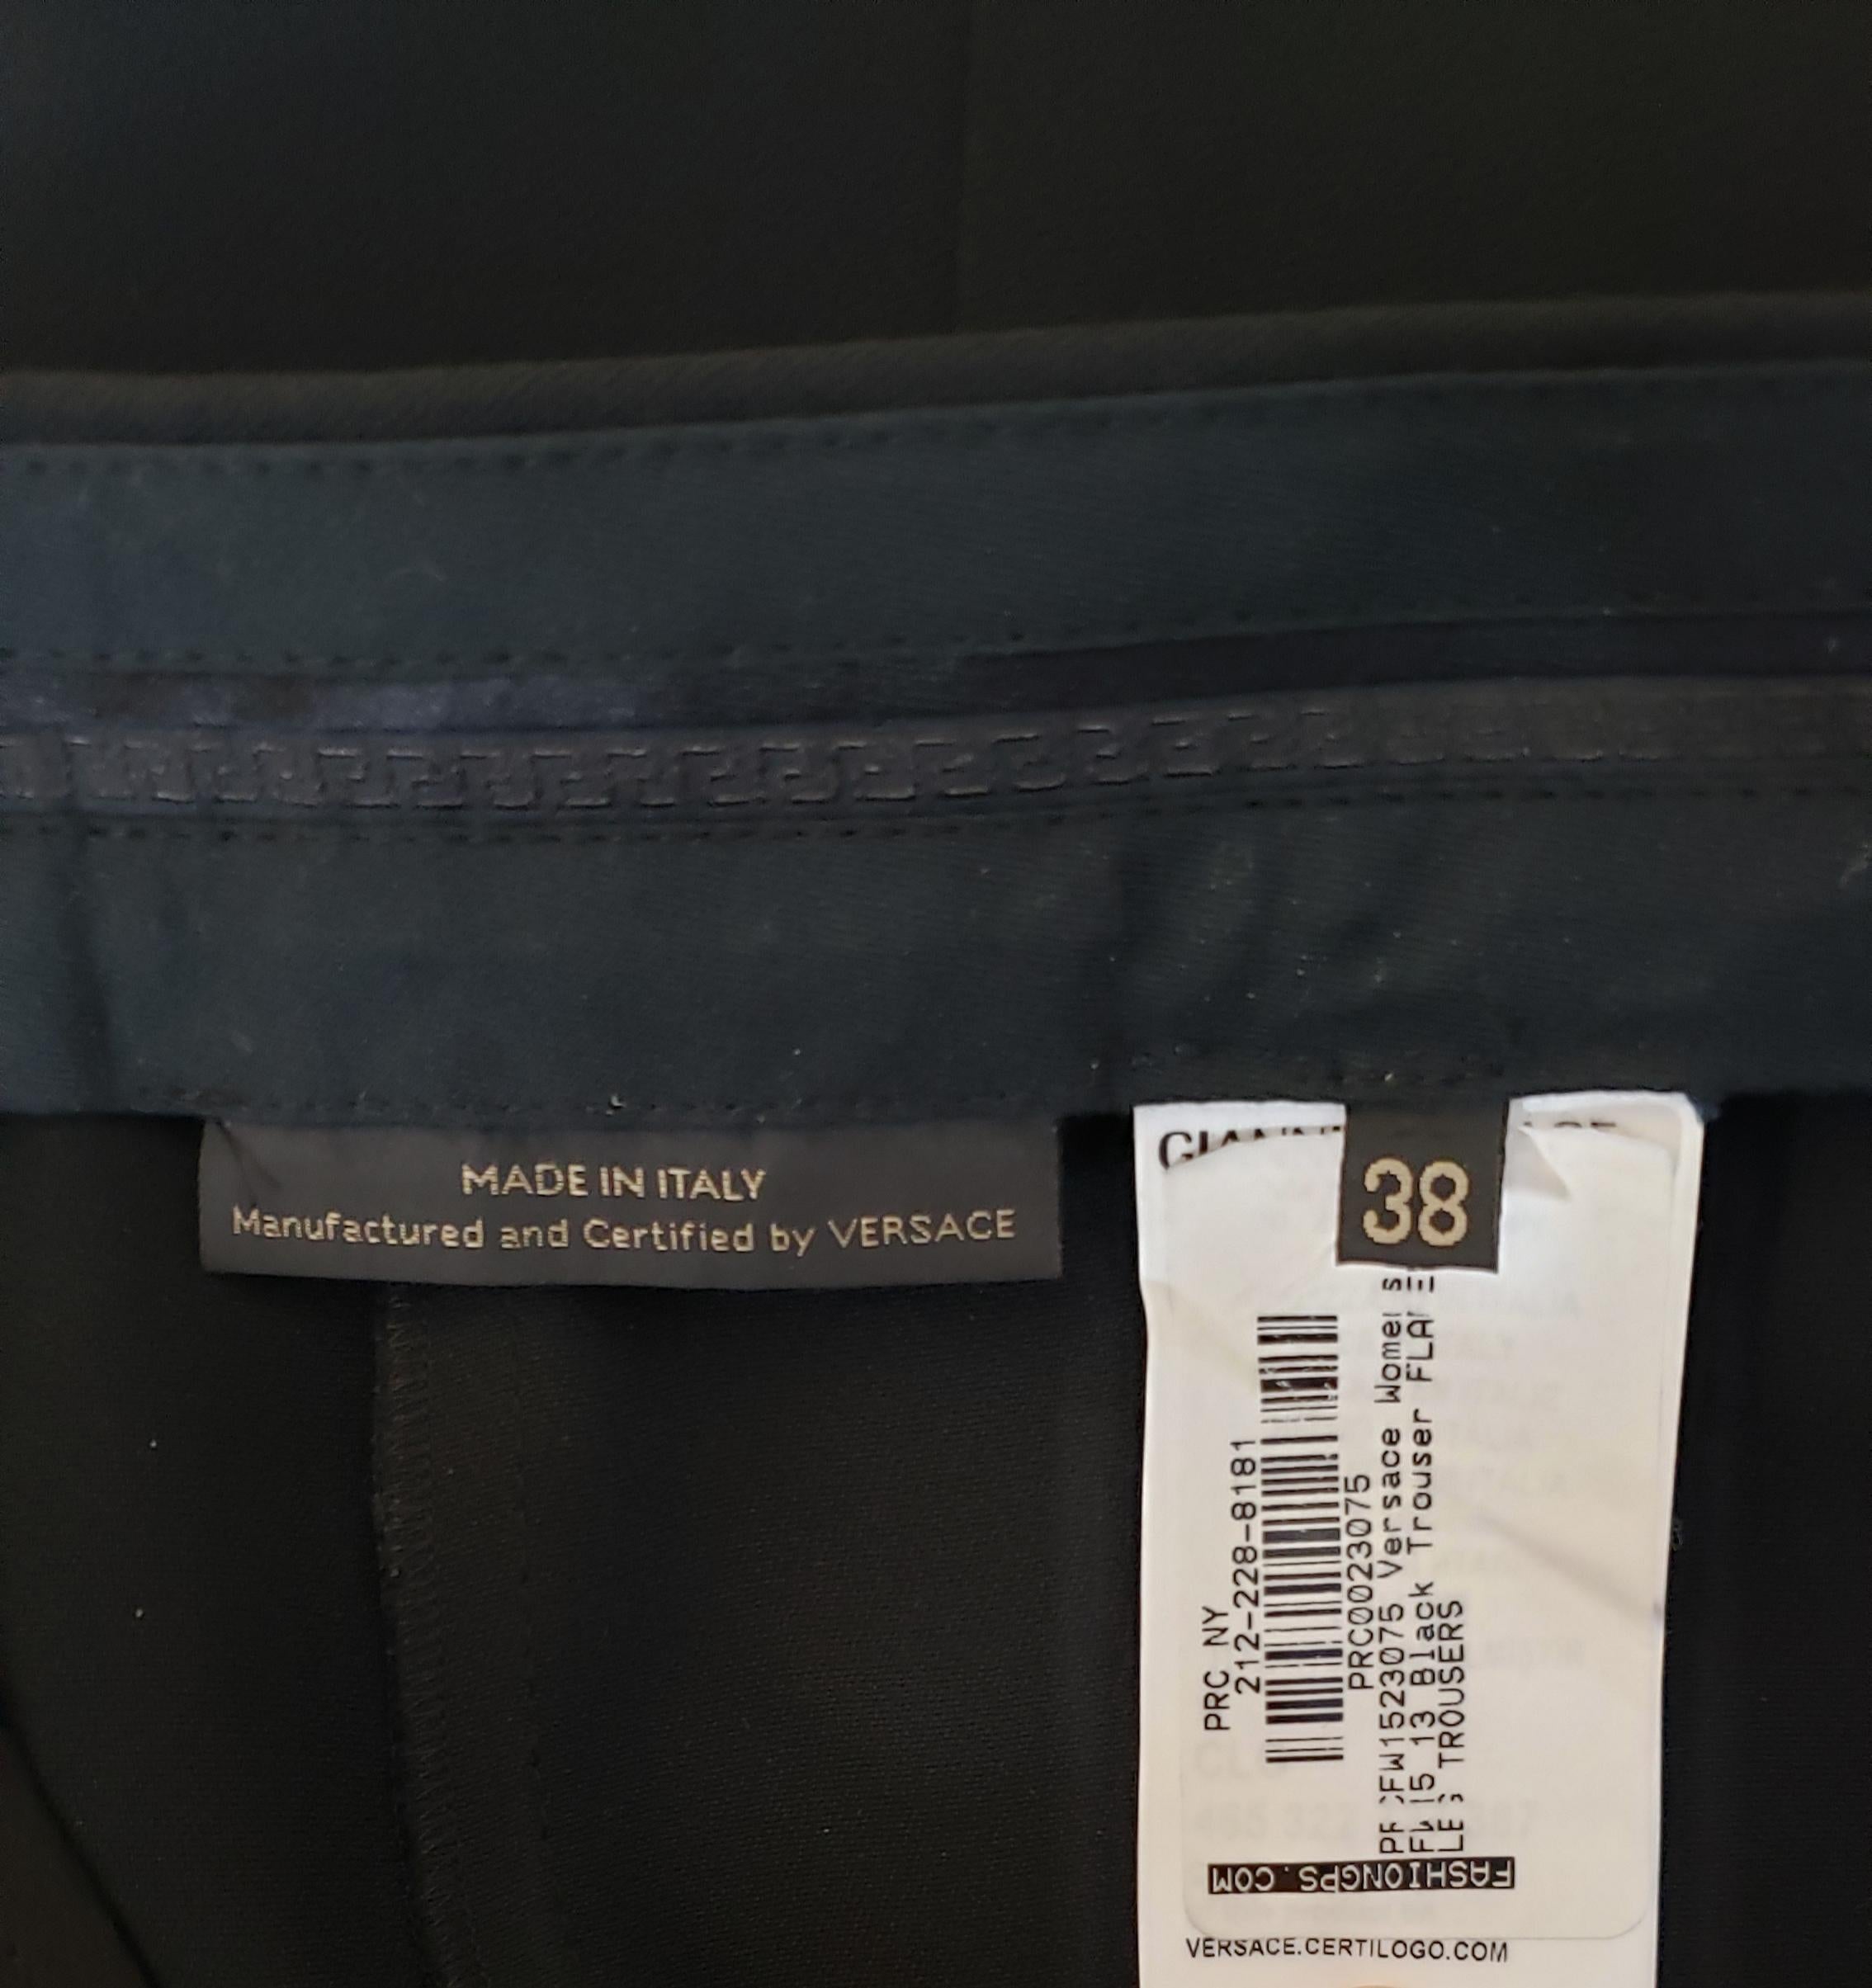 F/W 2010 L #13 VERSACE BLUE and NAVY BLUE MOTORCYCLE LEATHER PANTS size 38 - 2 For Sale 5